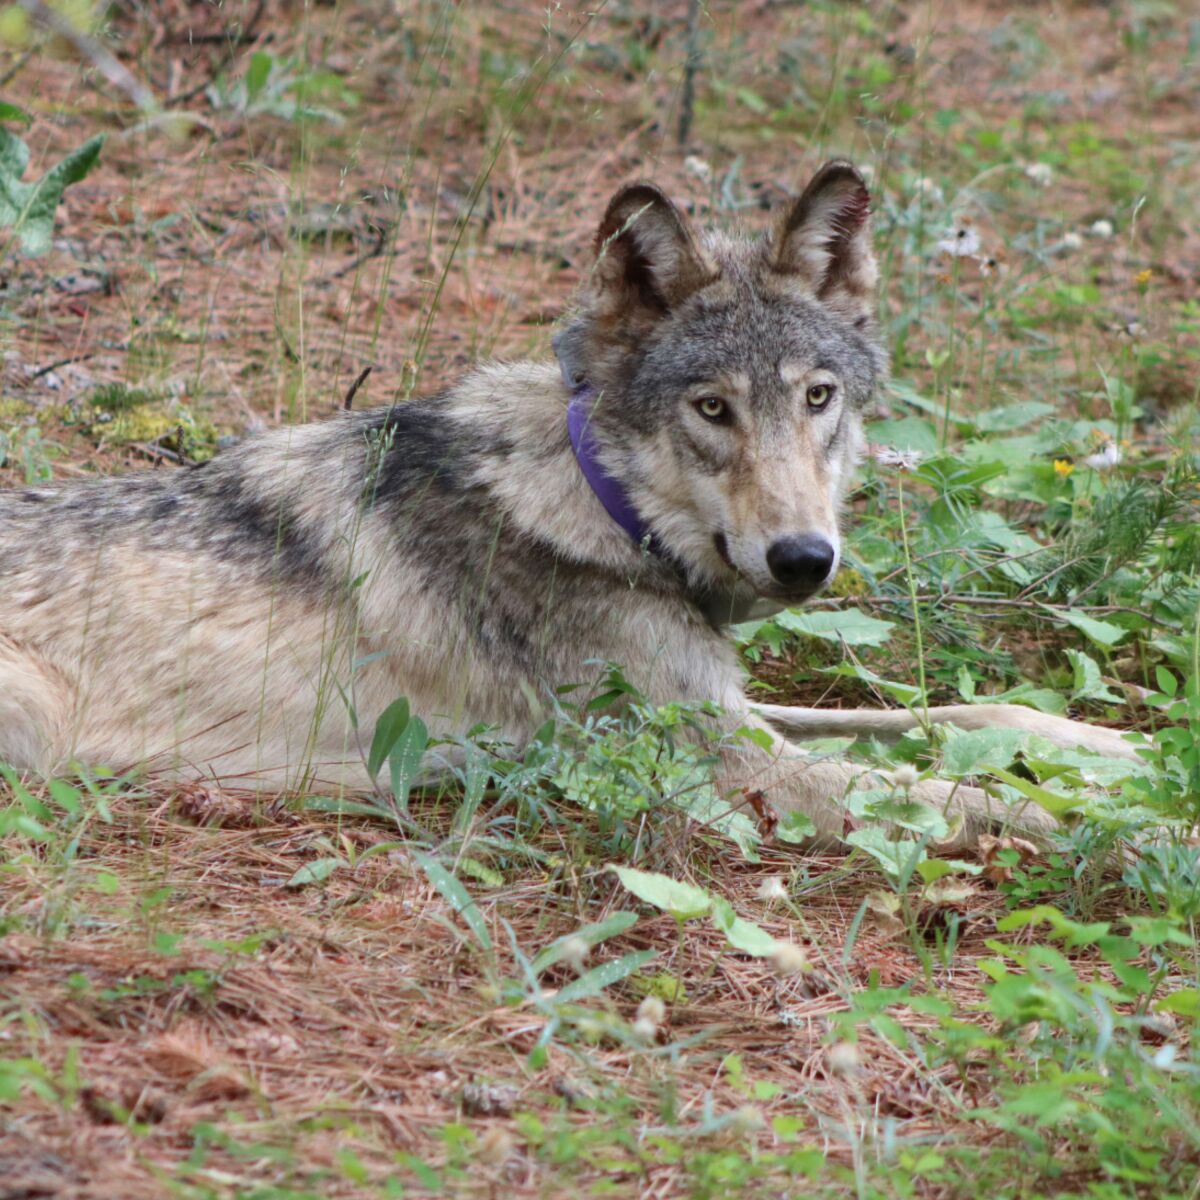 A wolf wearing a purple collar lies on the ground.